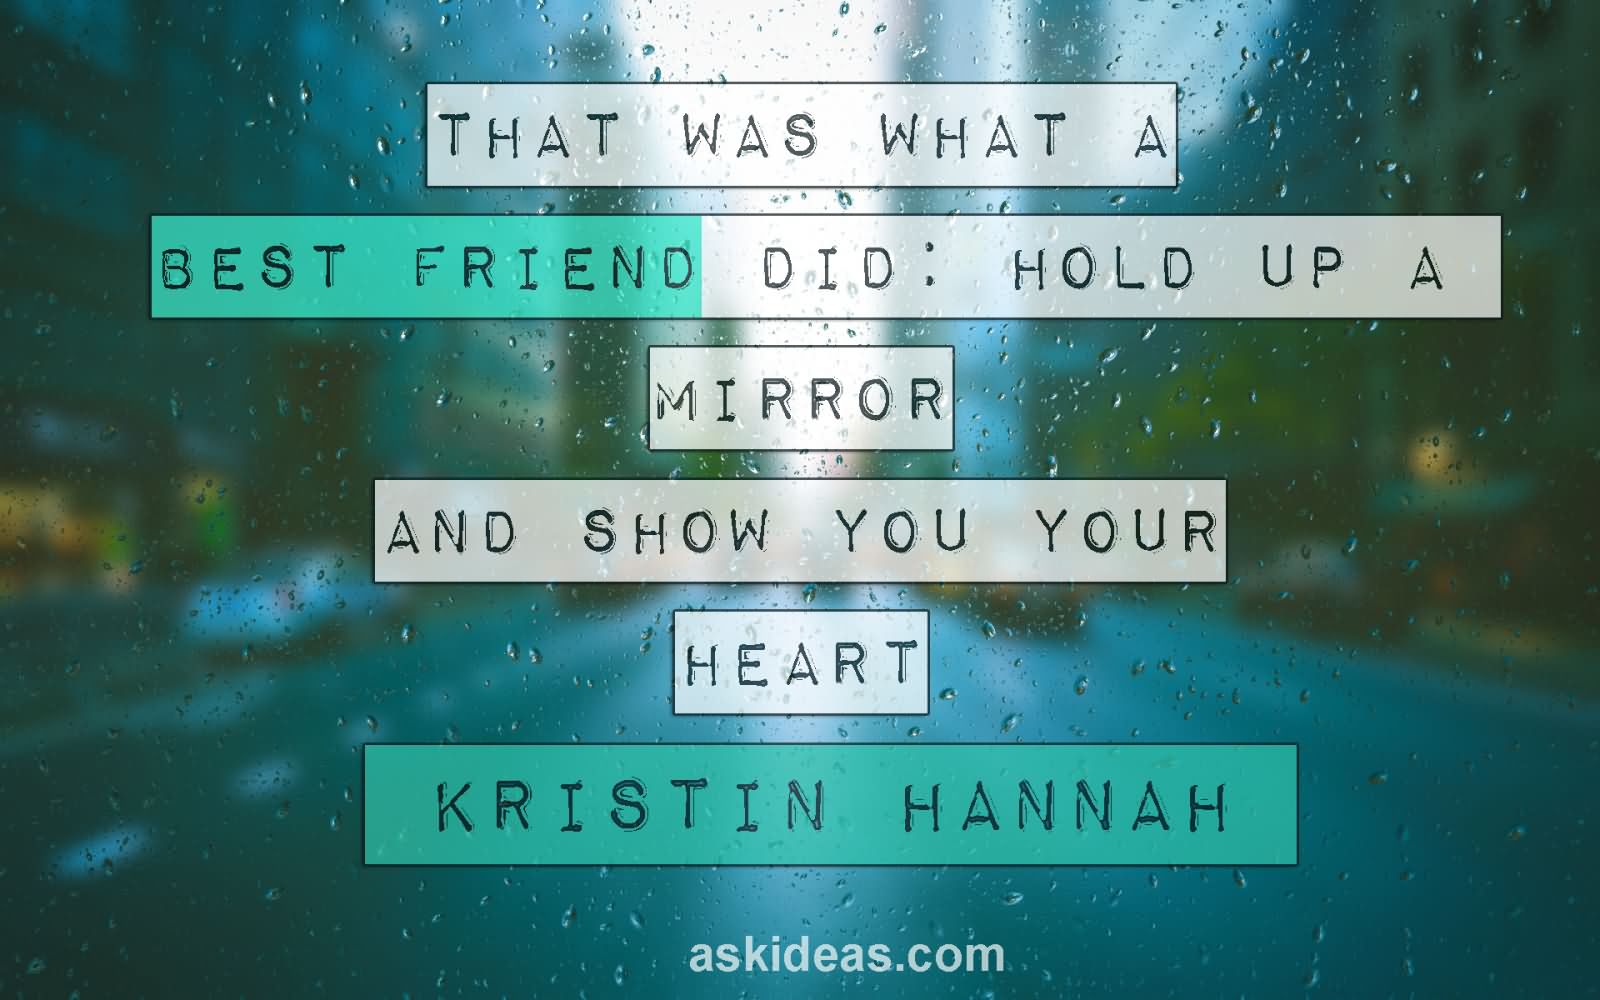 That was what a best friend did- hold up a mirror and show you your heart.